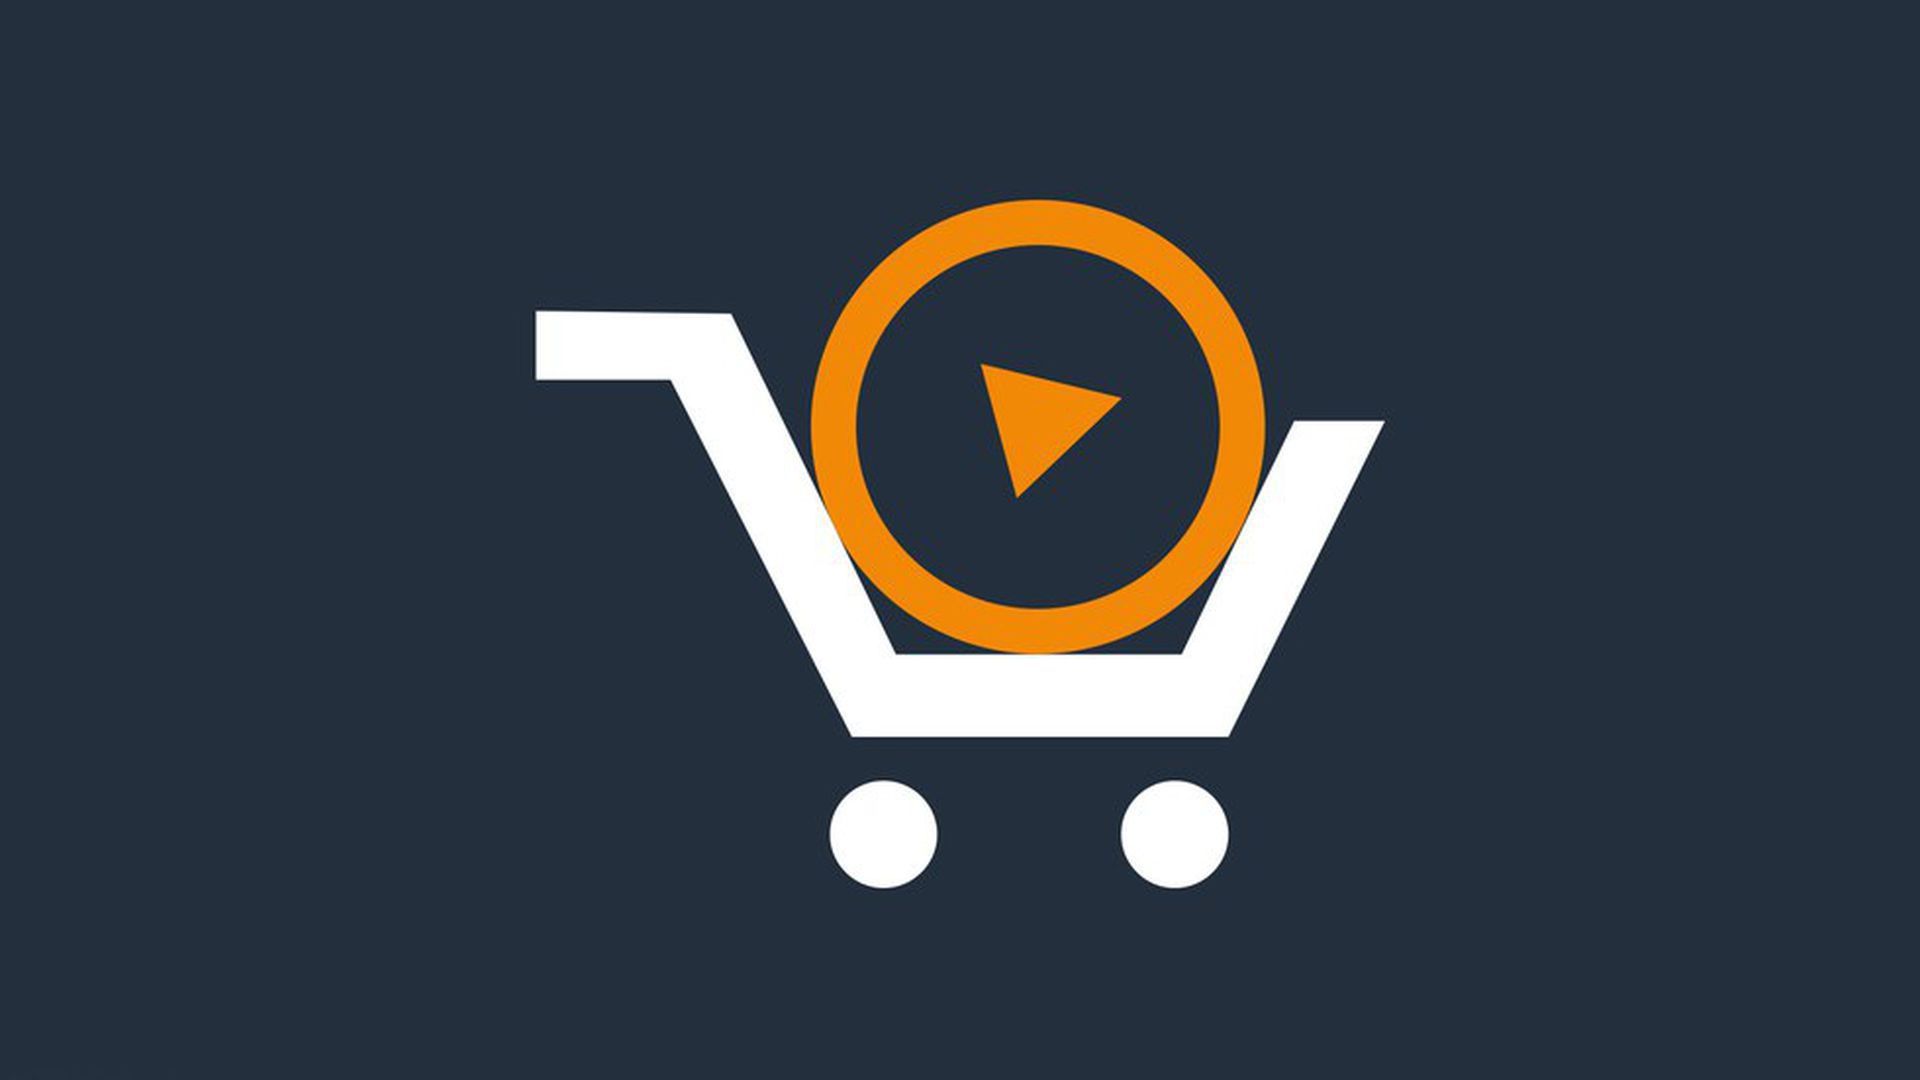 An image of the Amazon shopping cart logo with a play button